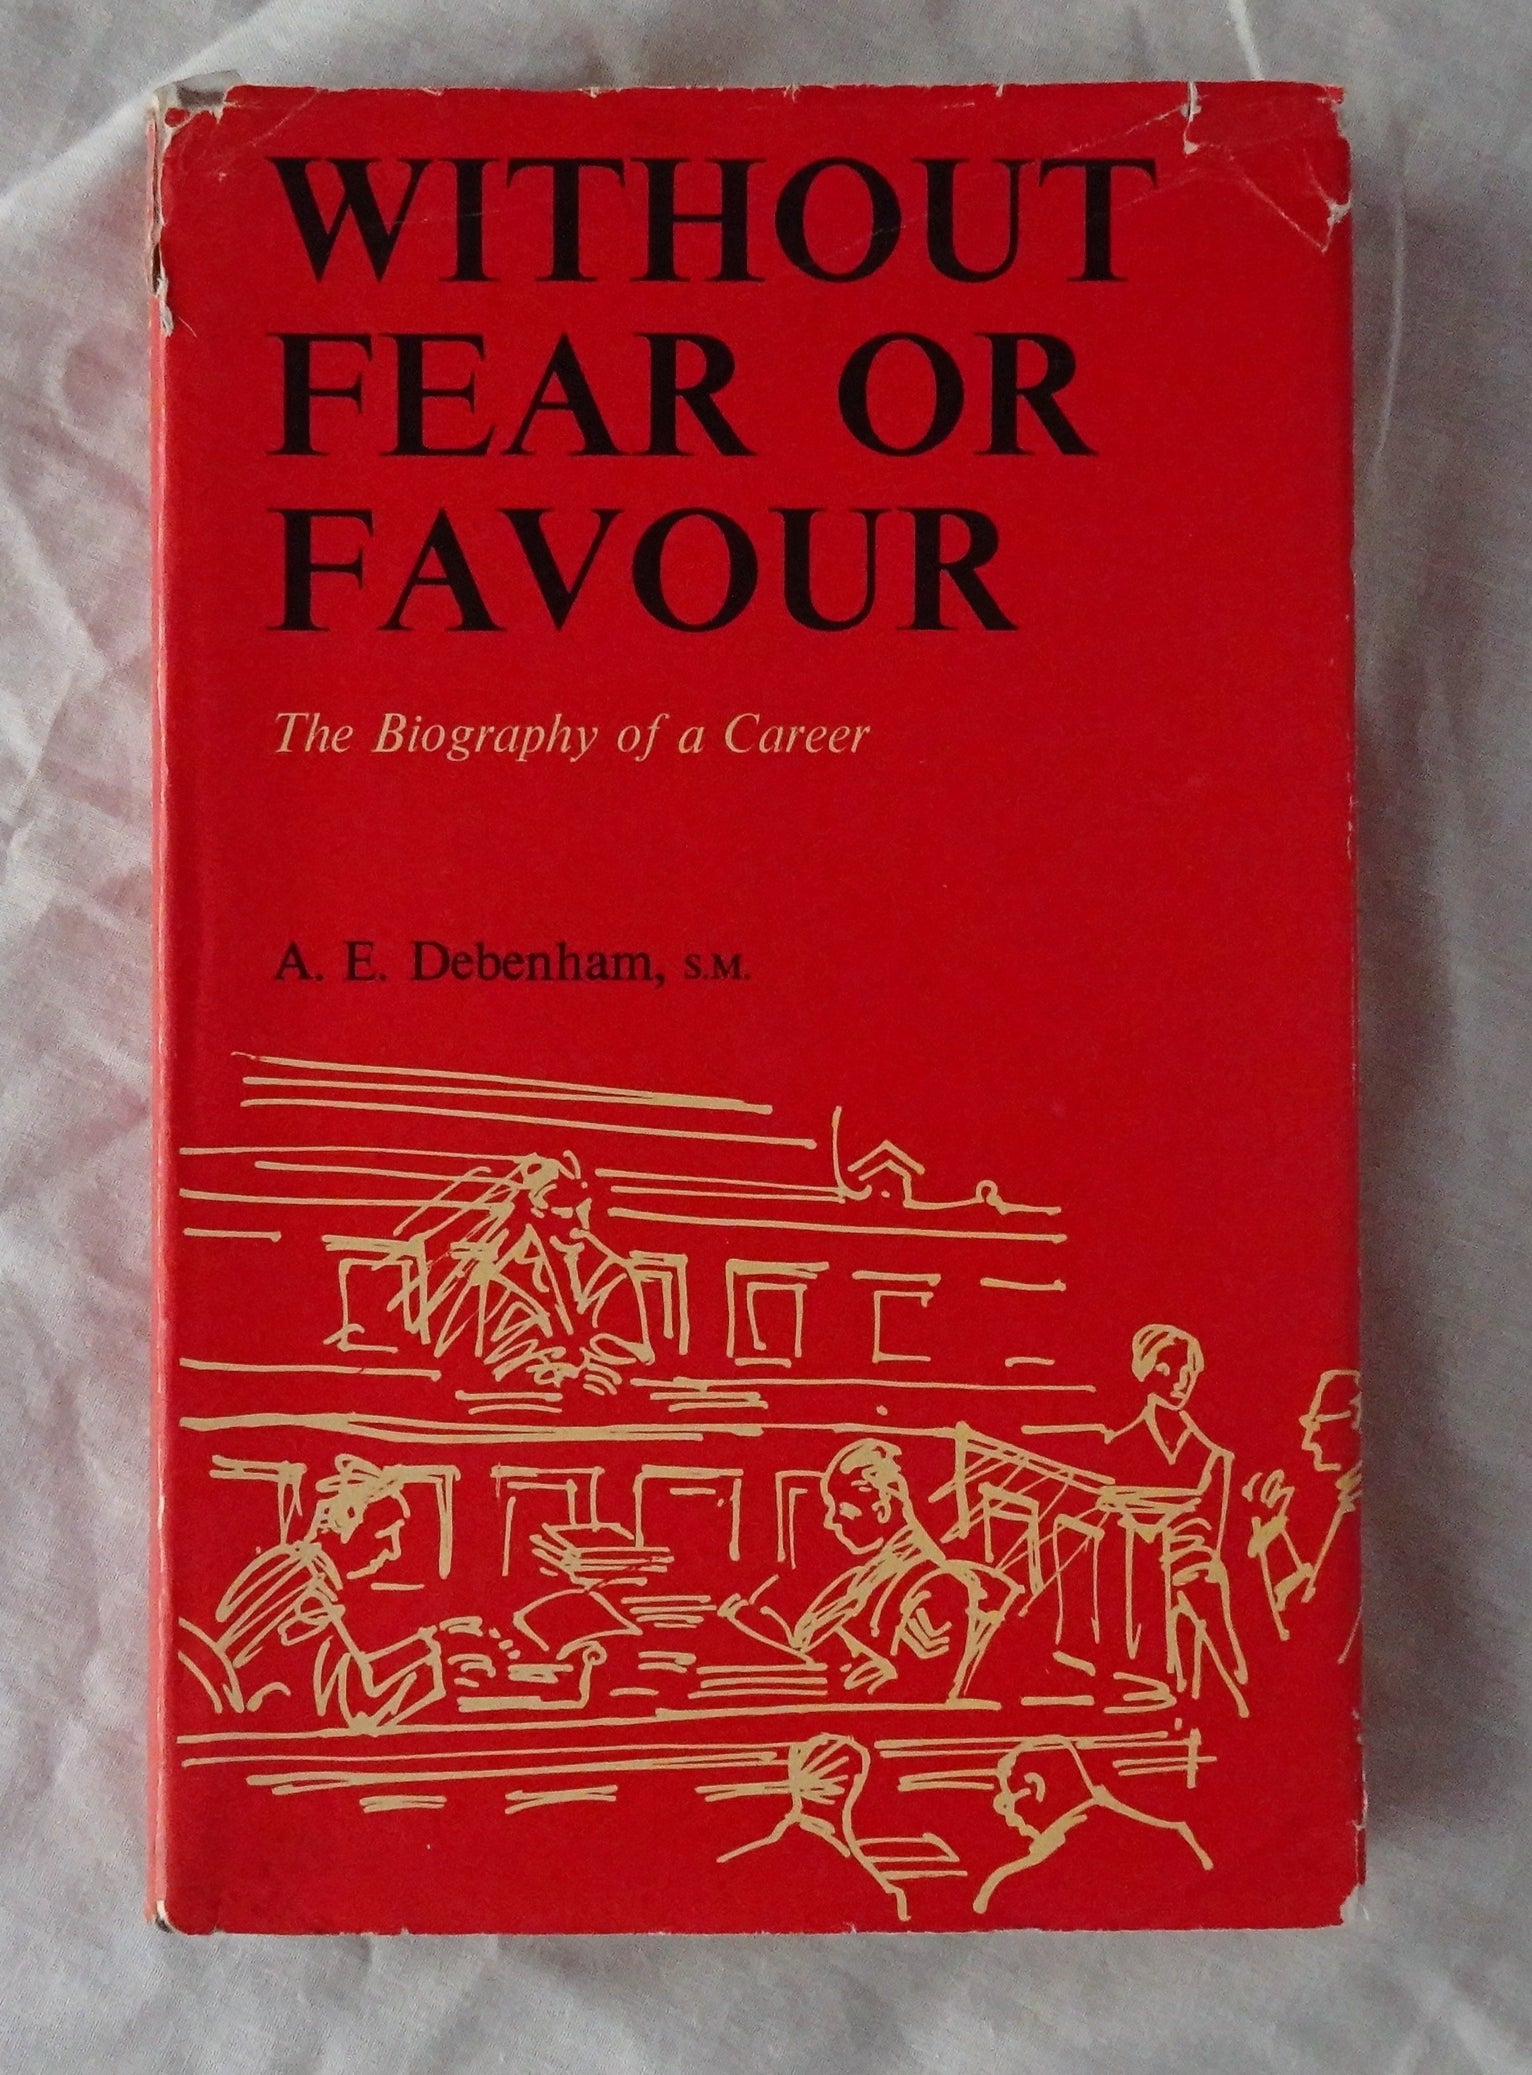 Without Fear or Favour  The Biography of a Career  by A. E. Debenham  (aided and abetted by Marien Dreyer)